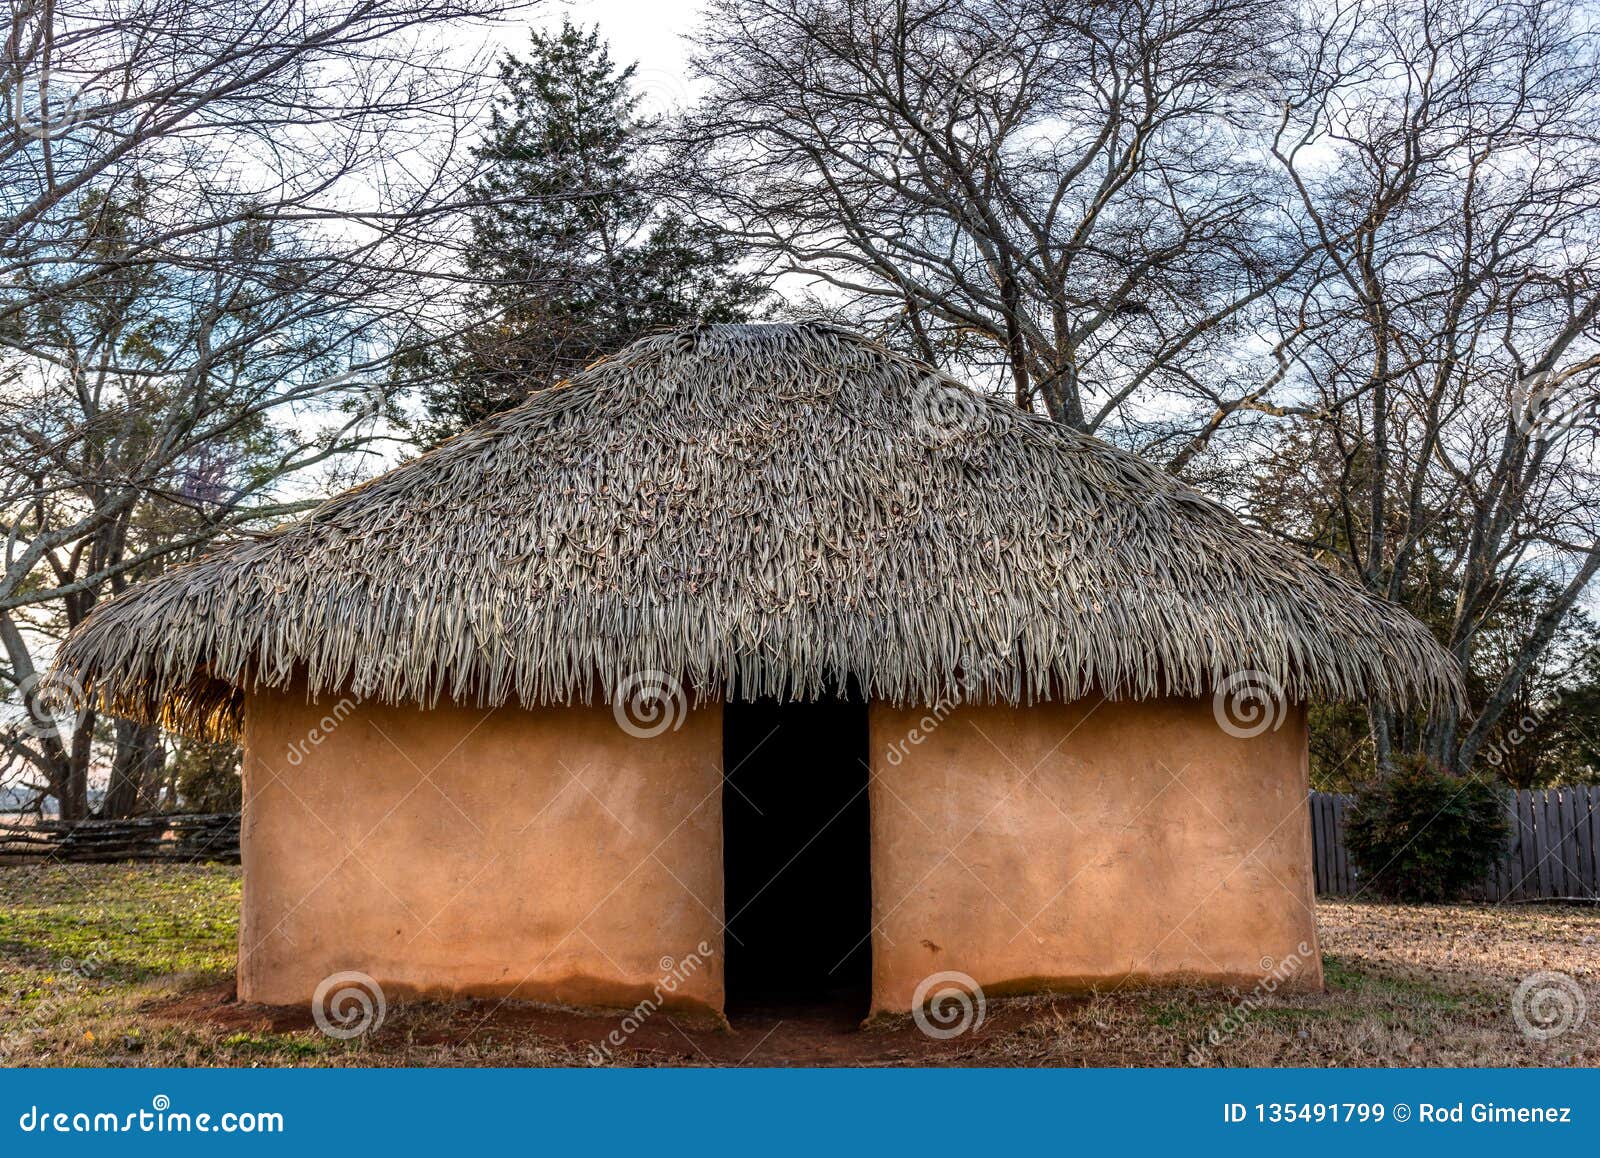 typical and historical wattle and daub houses used by cherokee and atsina indian tribes